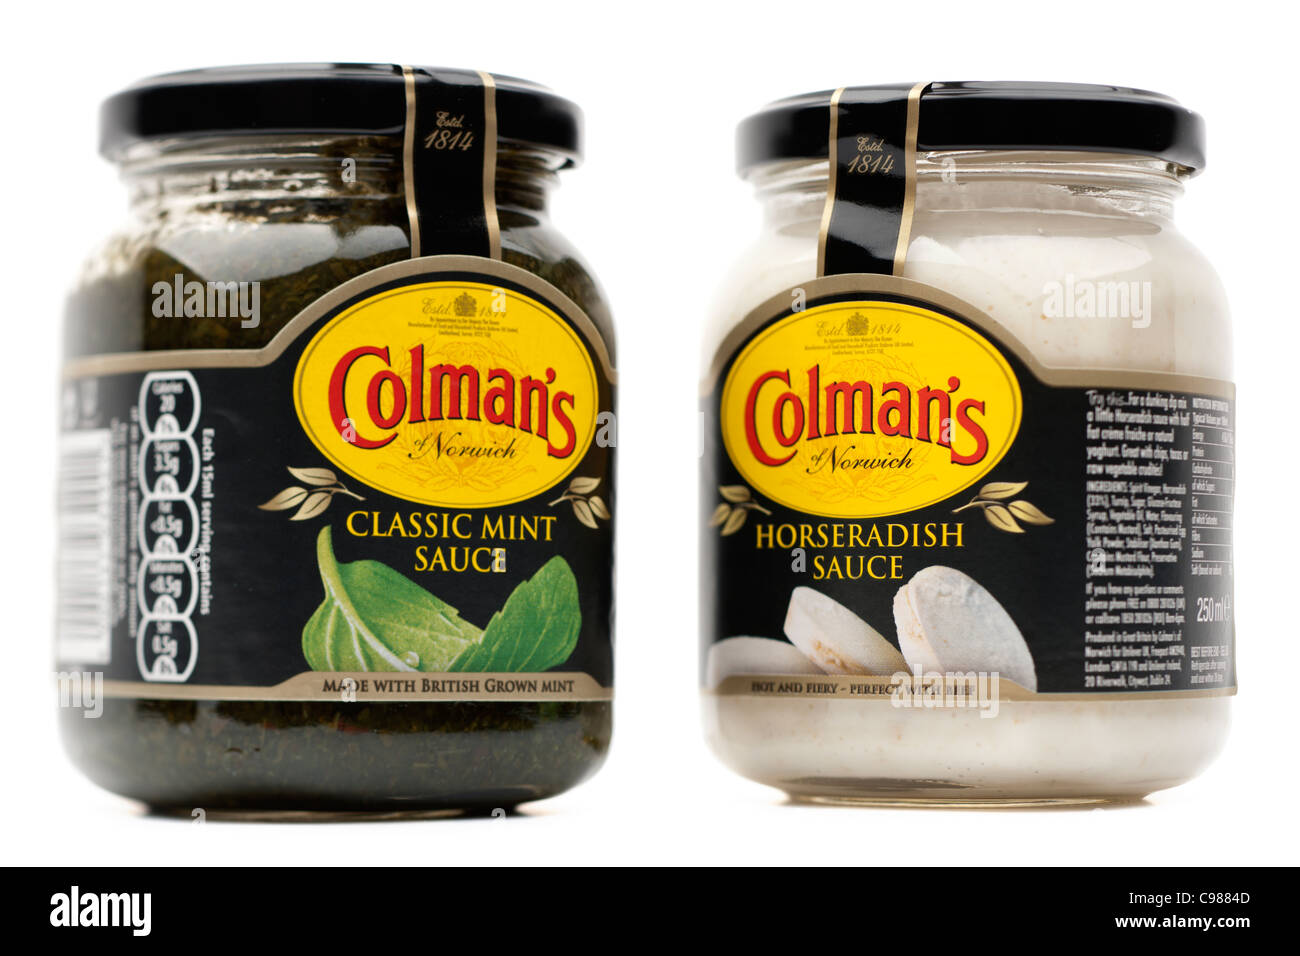 Two jars of Colmans sauces Classic mint sauce and Horseradish sauce Stock Photo